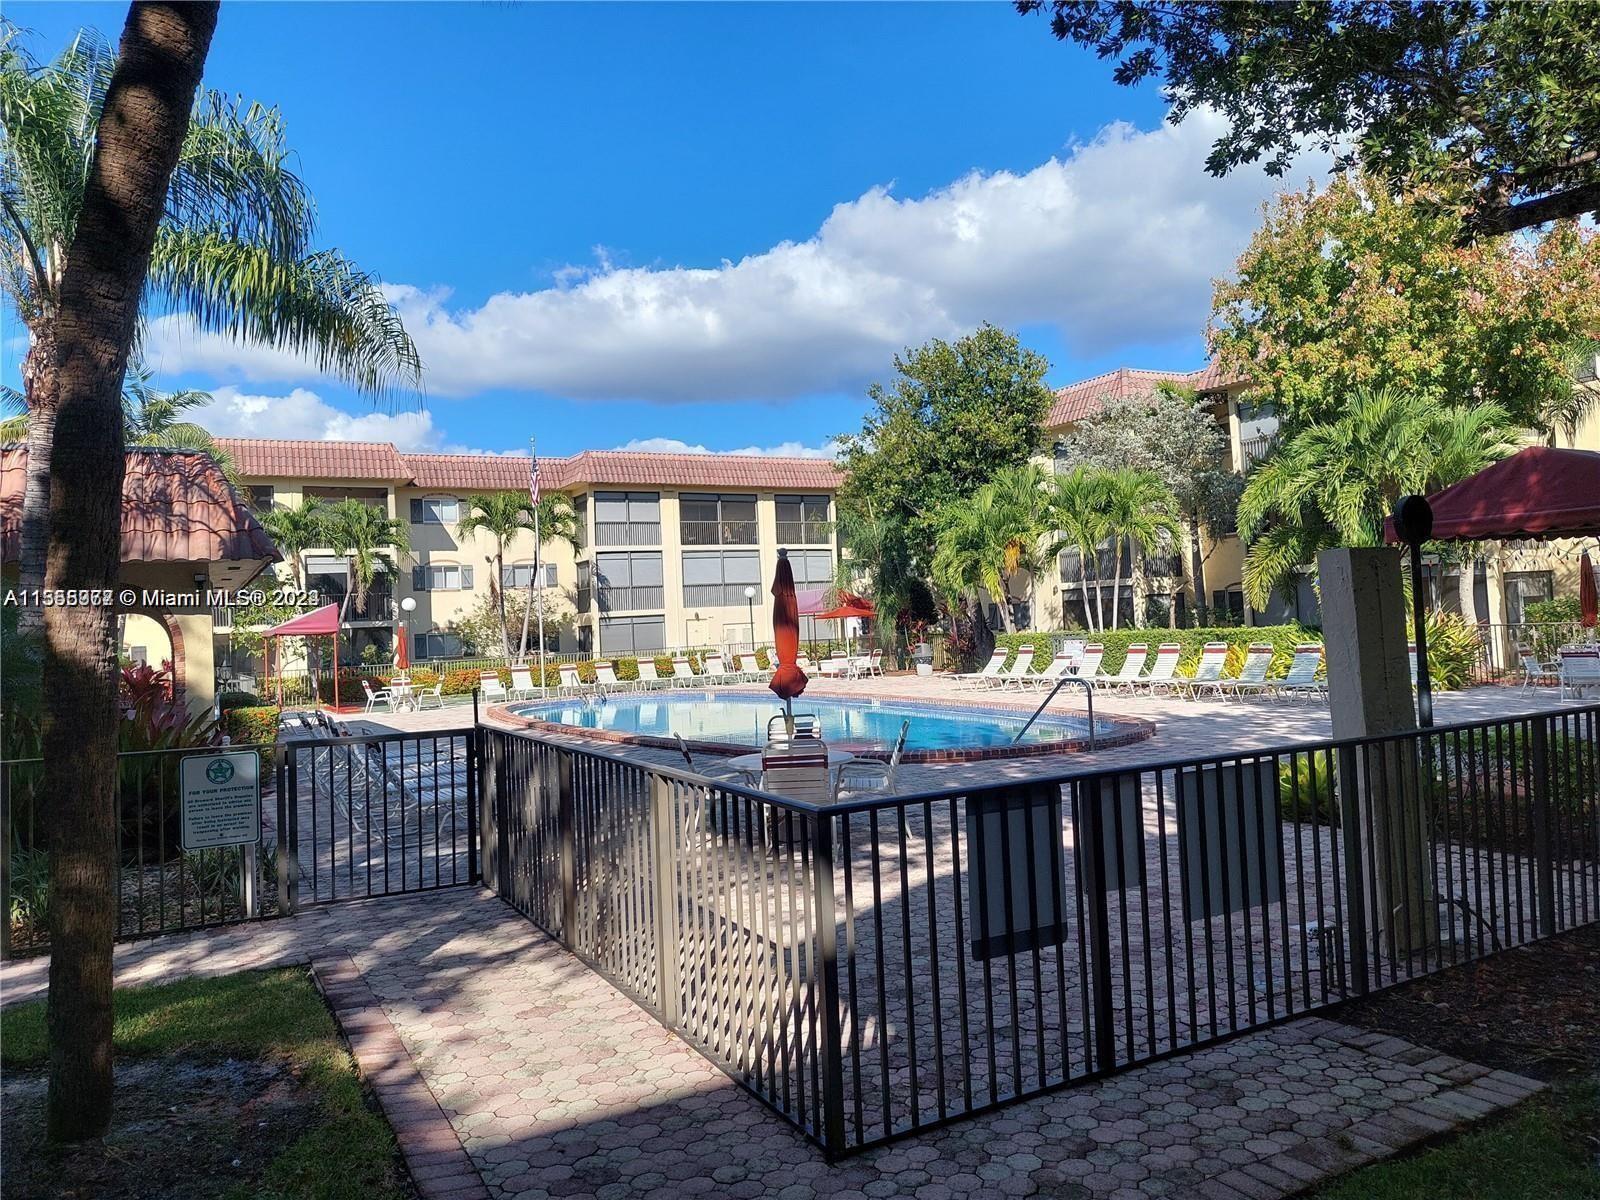 253 S Cypress Rd 214, Pompano Beach, Florida 33060, 1 Bedroom Bedrooms, ,1 BathroomBathrooms,Residentiallease,For Rent,253 S Cypress Rd 214,A11555977